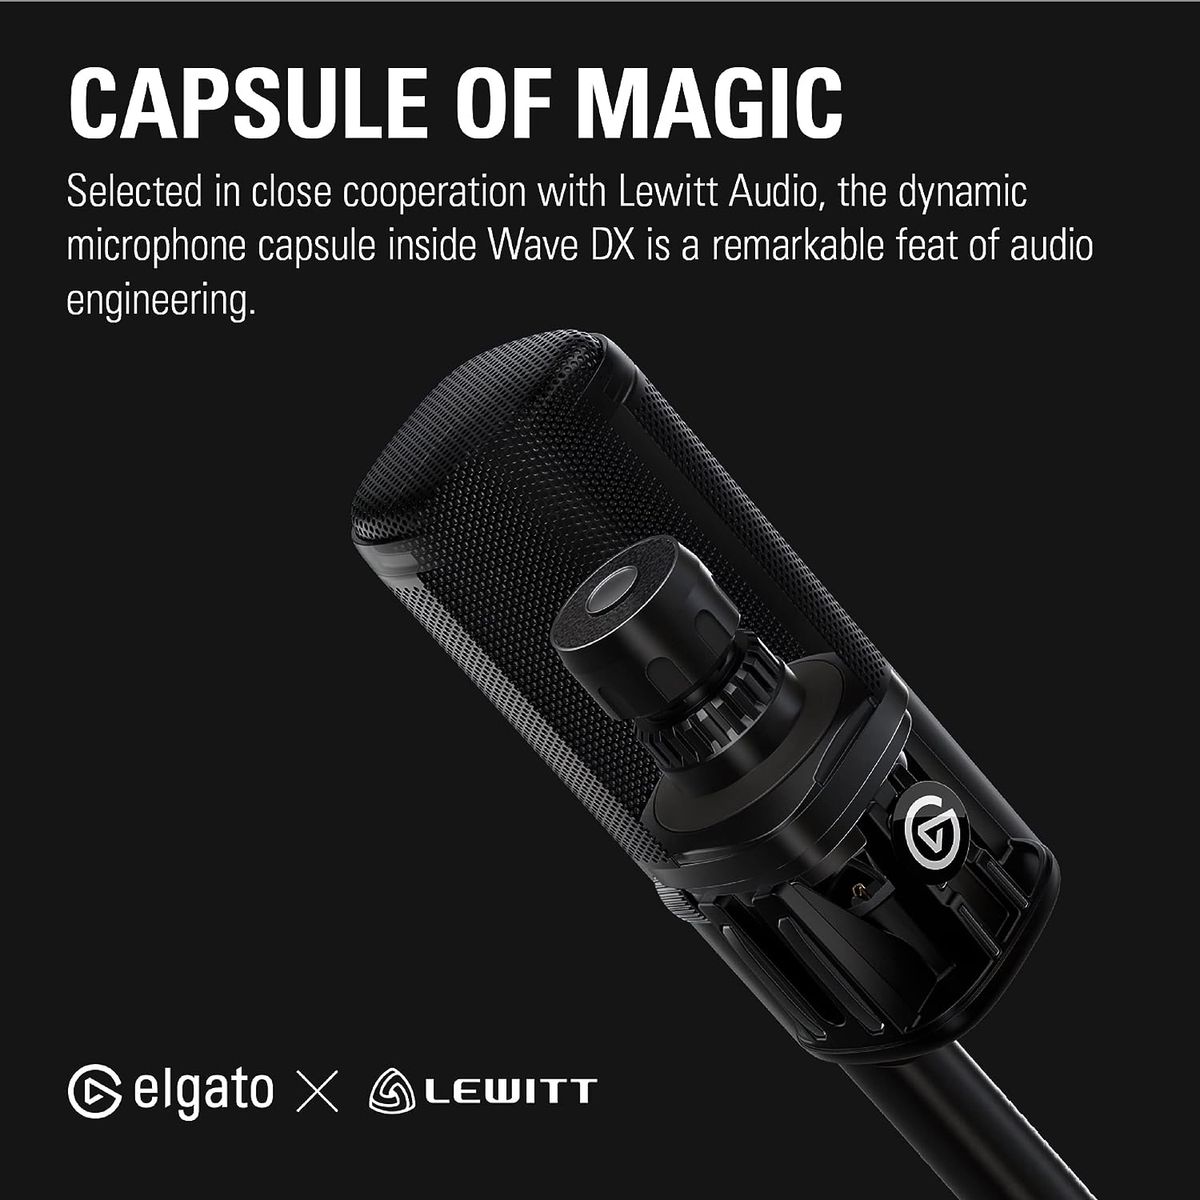 Elgato Wave DX XLR Microphone, Speech Optimized, No Signal Booster  Required, Reduces Unwanted Noise, Wide Acceptance Angle, Works With Any  Audio